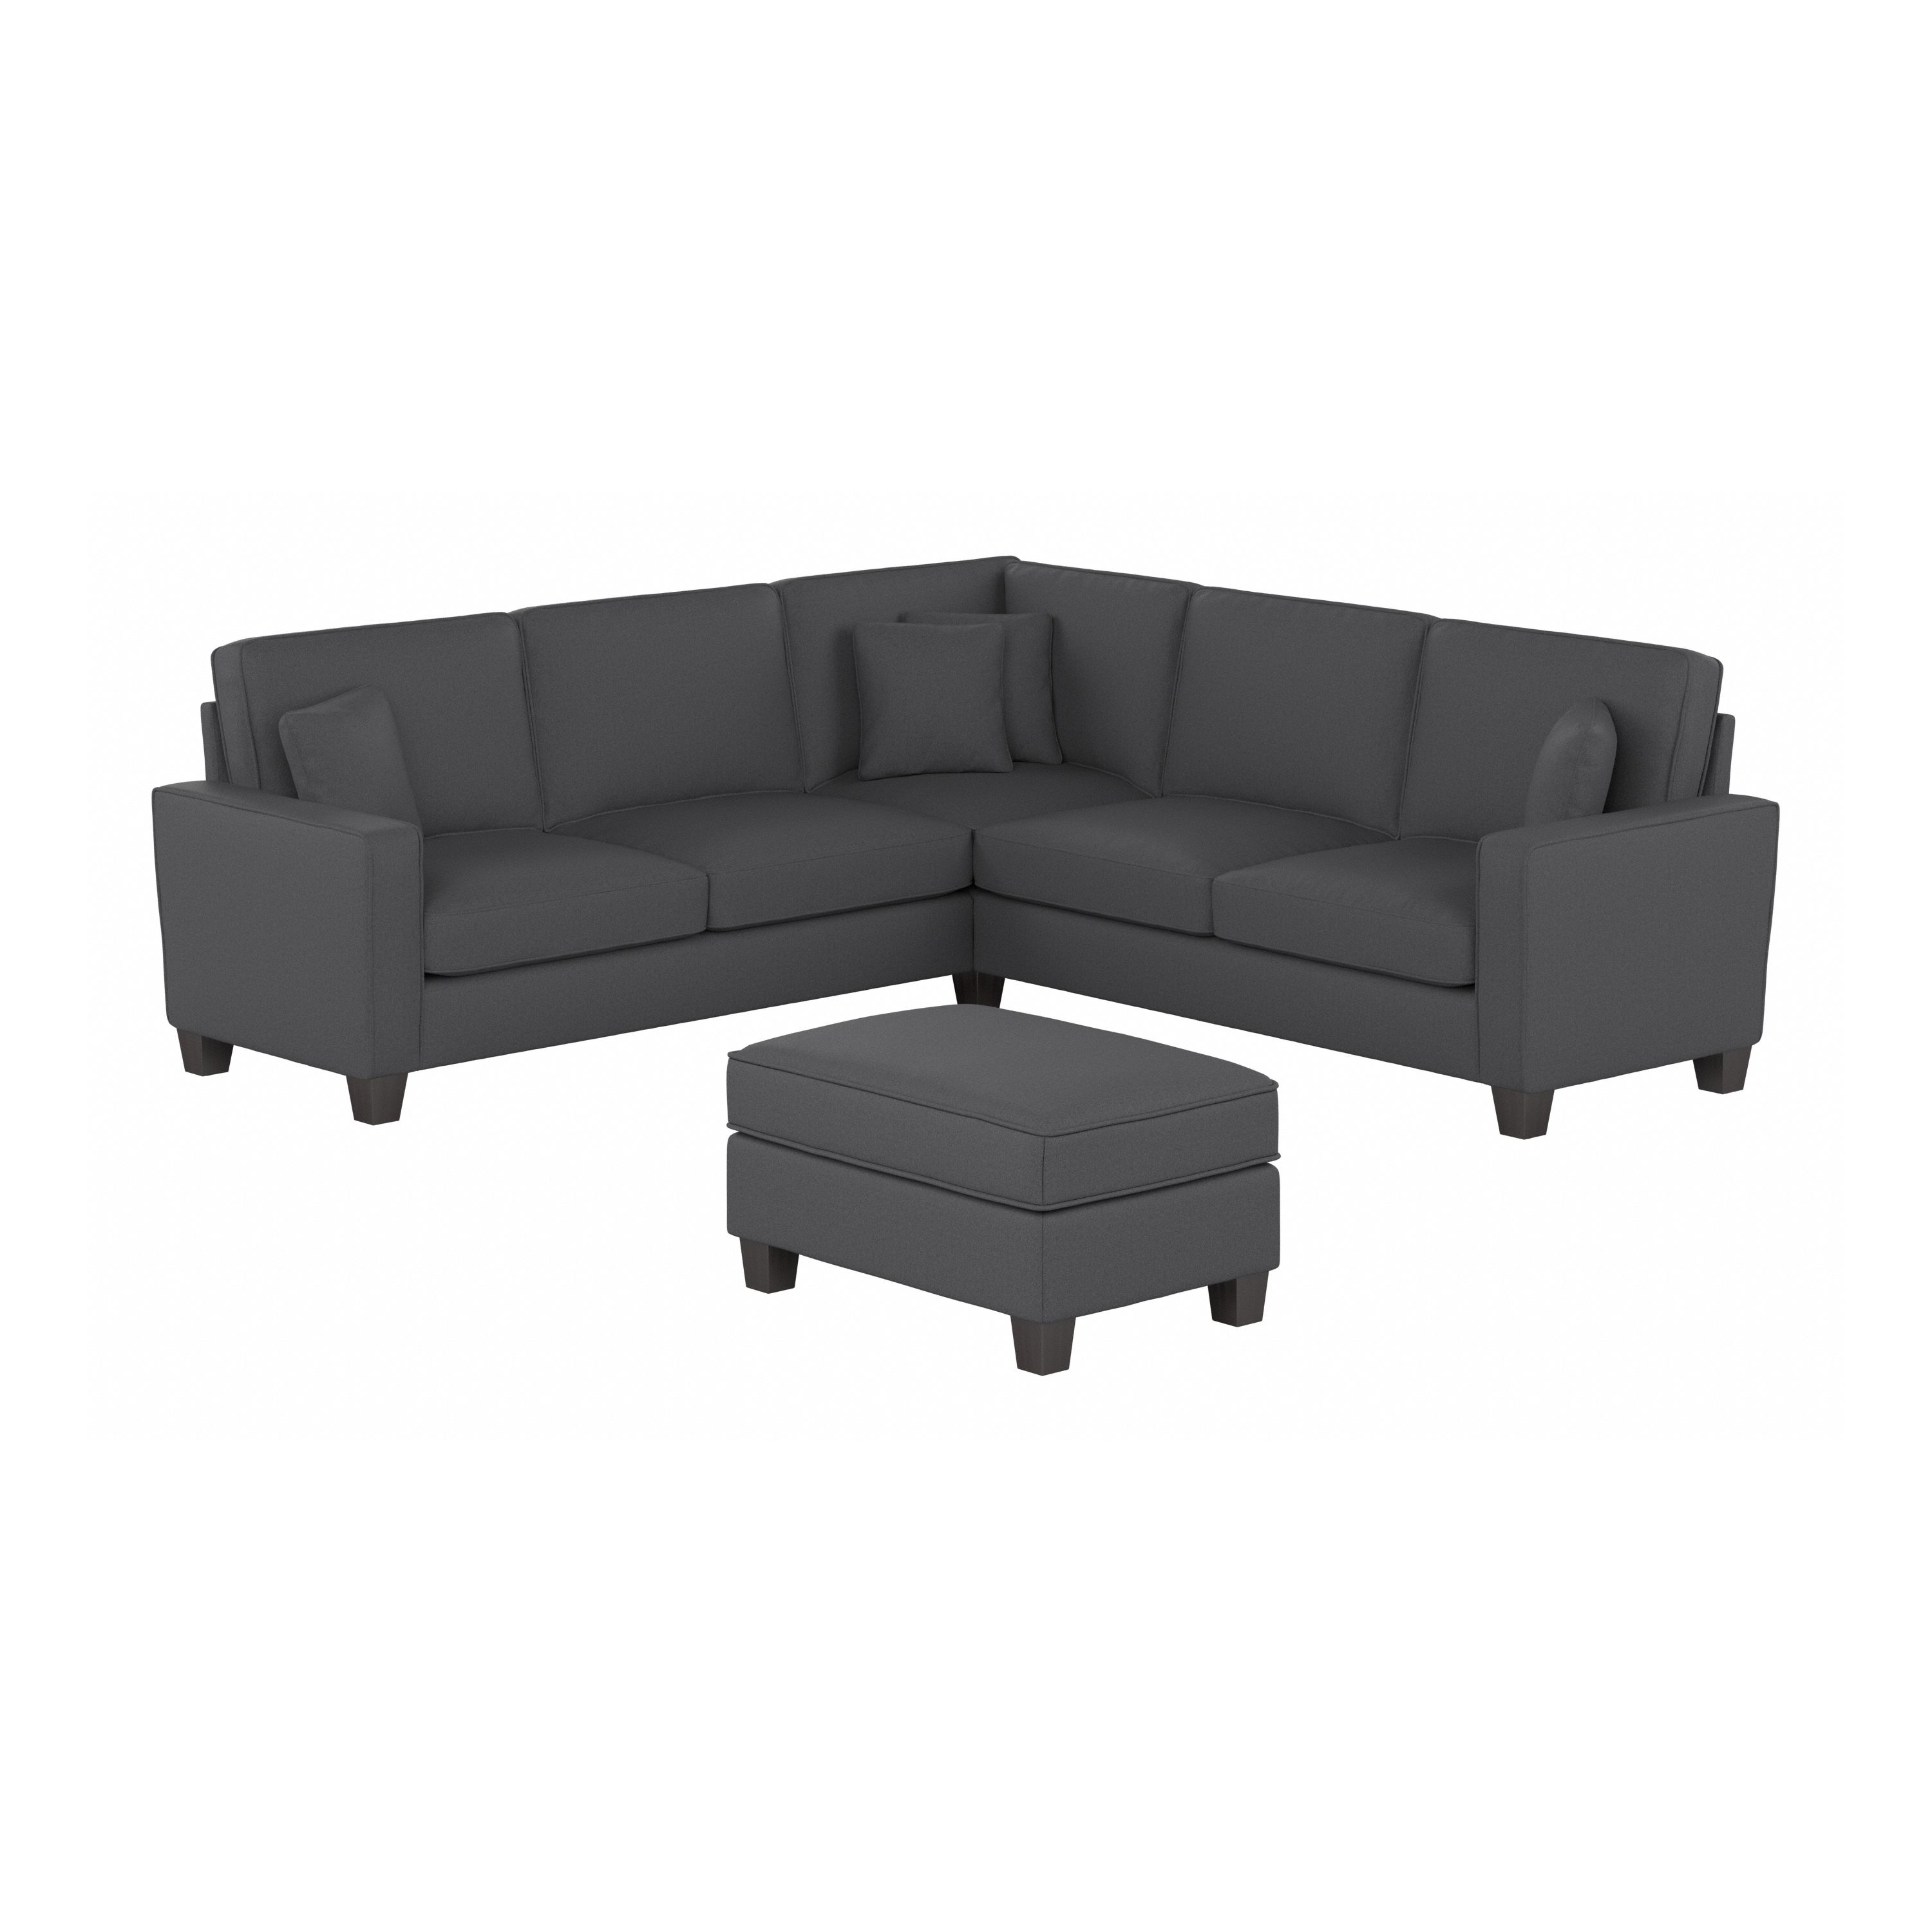 Shop Bush Furniture Stockton 99W L Shaped Sectional Couch with Ottoman 02 SKT003CGH #color_charcoal gray herringbone fabr